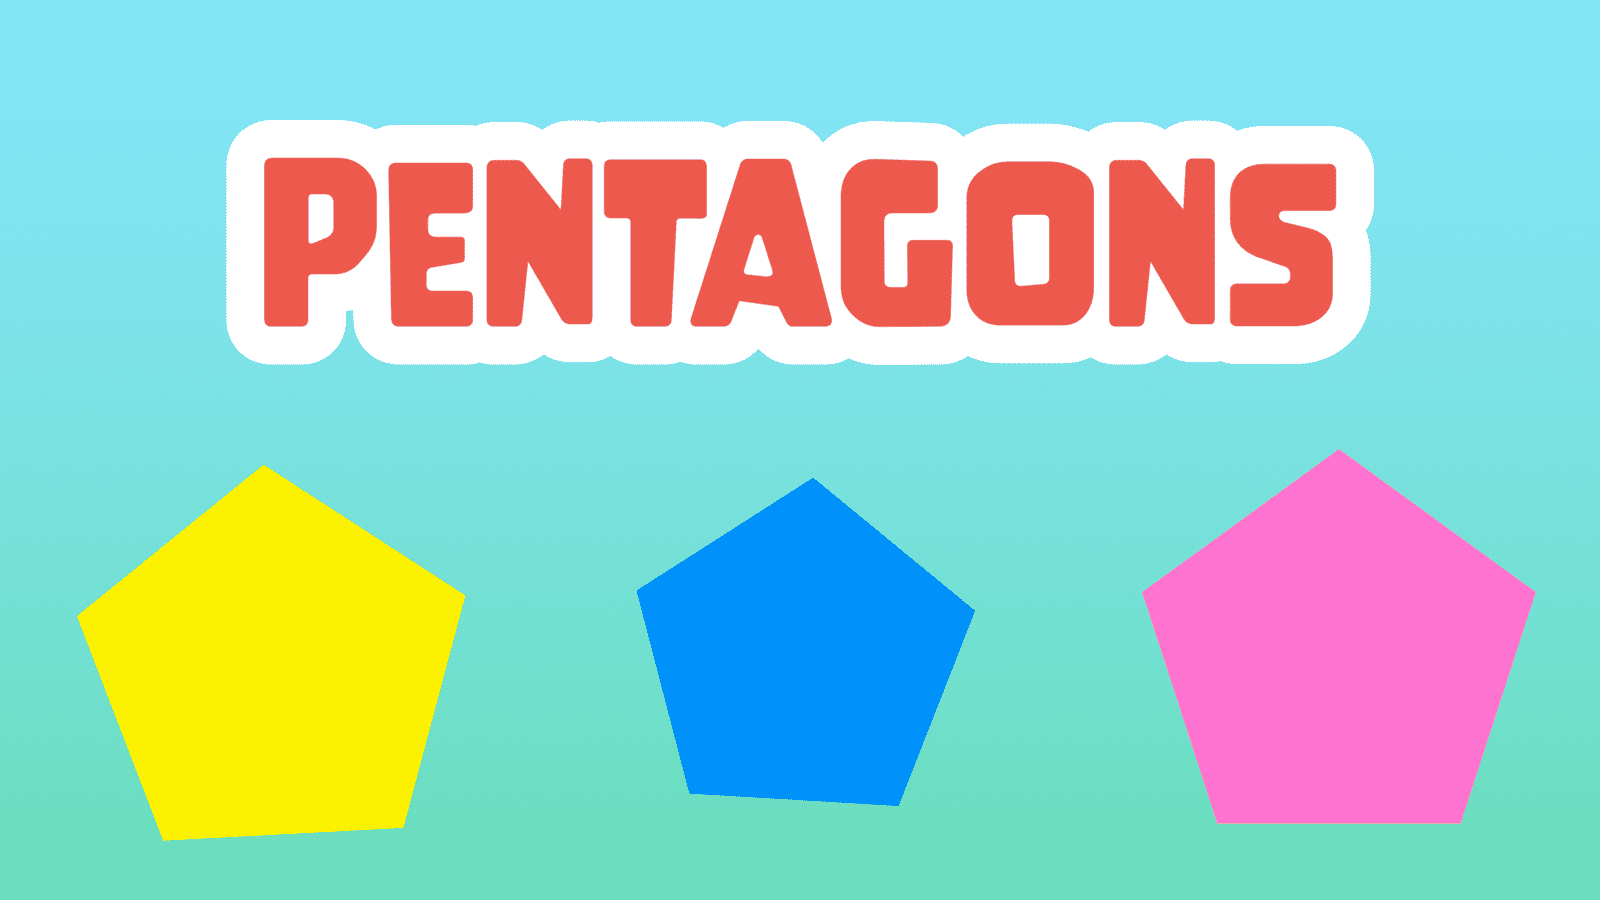 Pentagon Facts for Kids – 5 Amazing Facts about the Pentagon